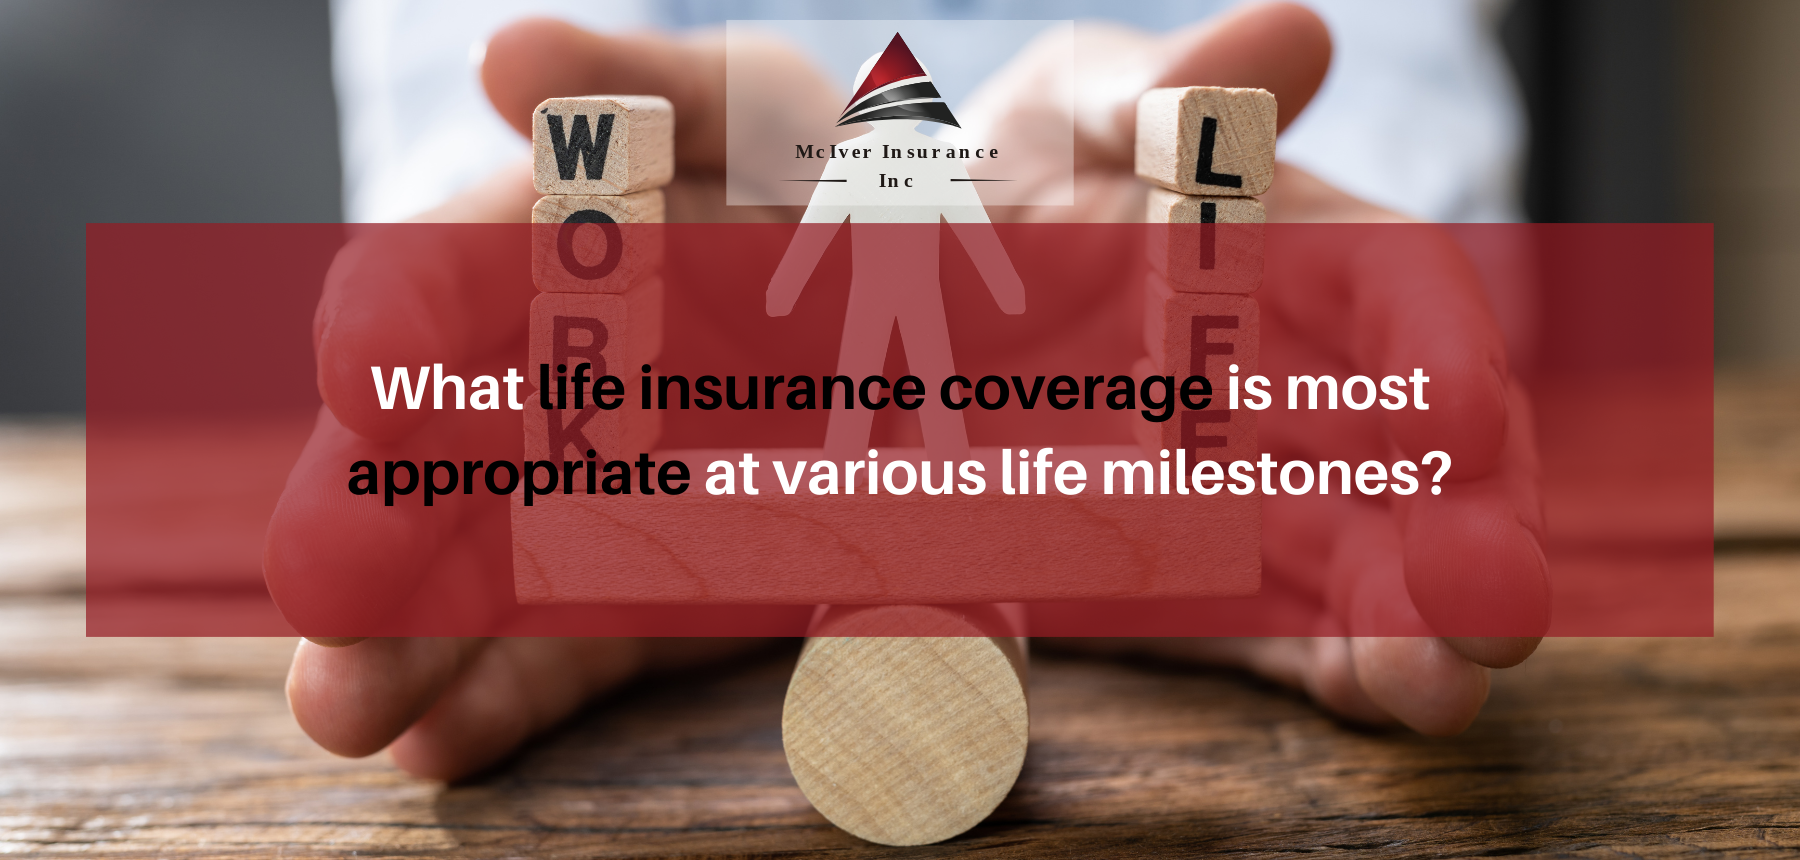 What life insurance coverage is most appropriate at various life milestones